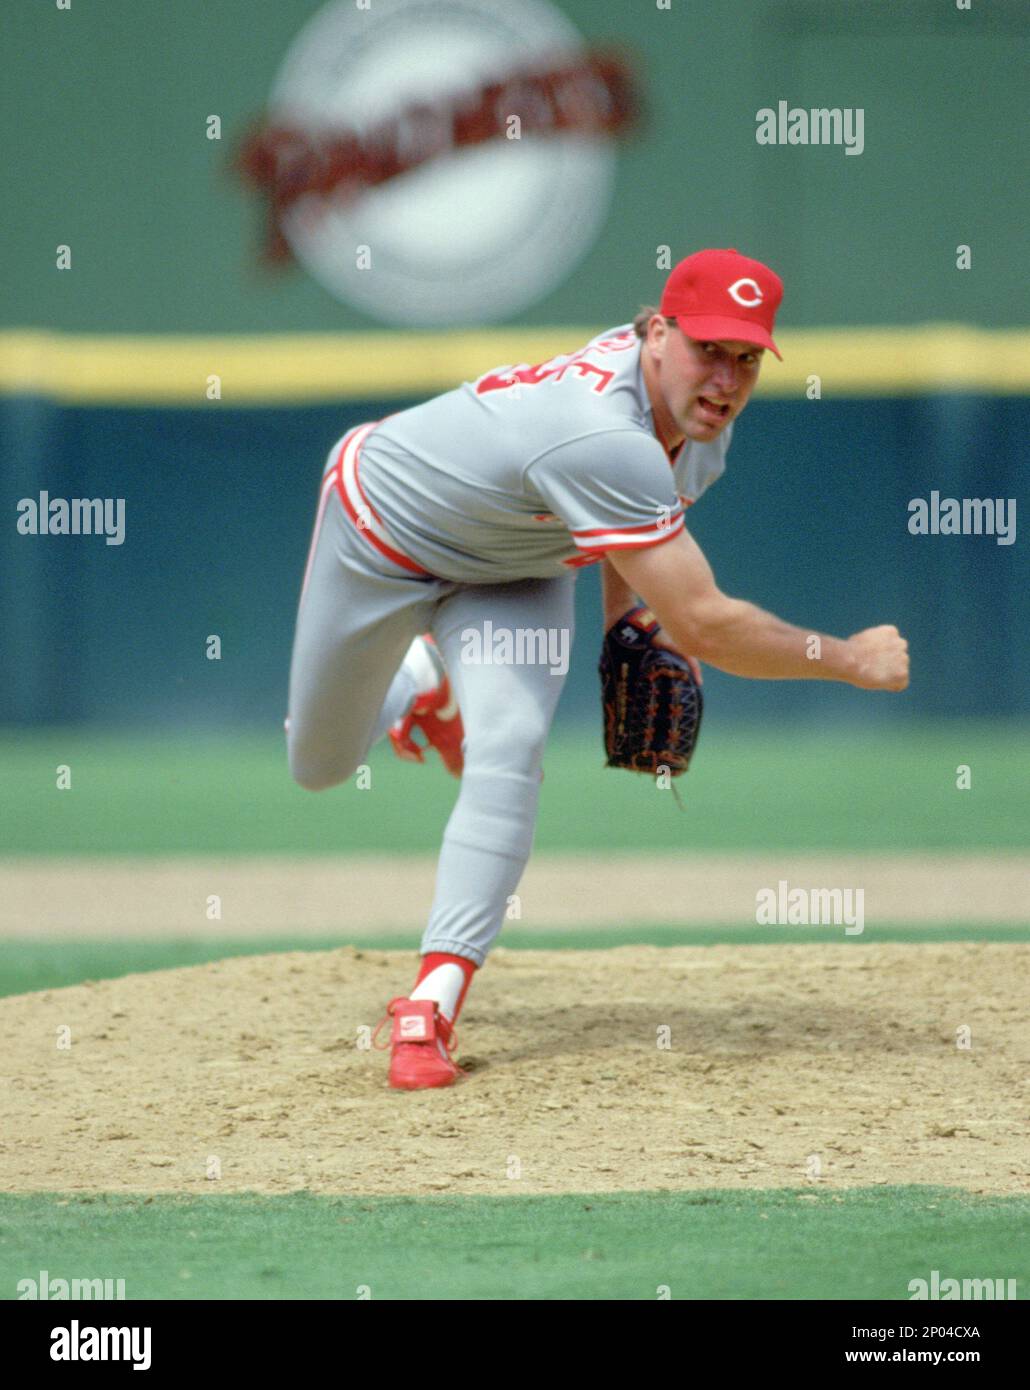 Cincinnati Reds Rob Dibble (49) in action during a game from his career  with the Cincinnati Reds. Rob Dibble played for 7 seasons with 3 different  teams, was an 2-time All-Star.(David Durochik